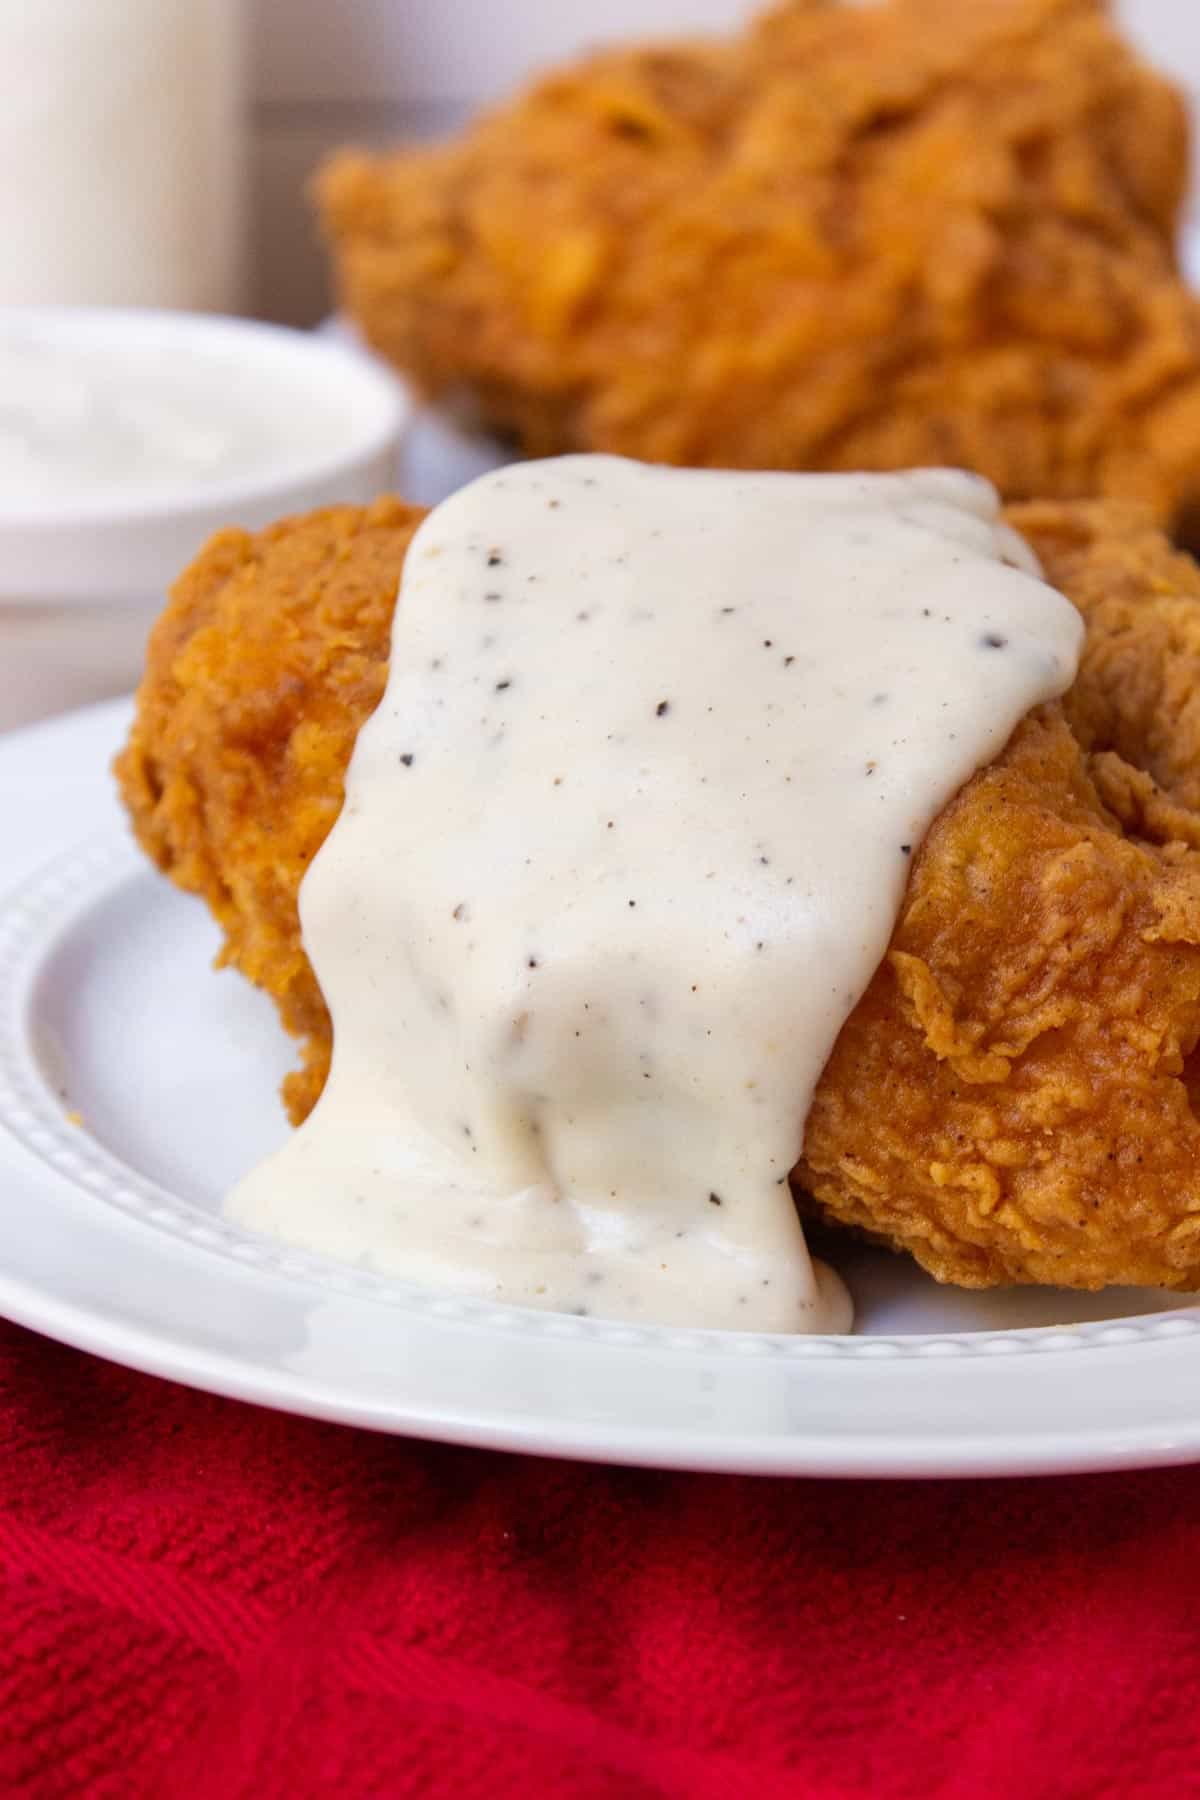 Southern Country Gravy over fried chicken